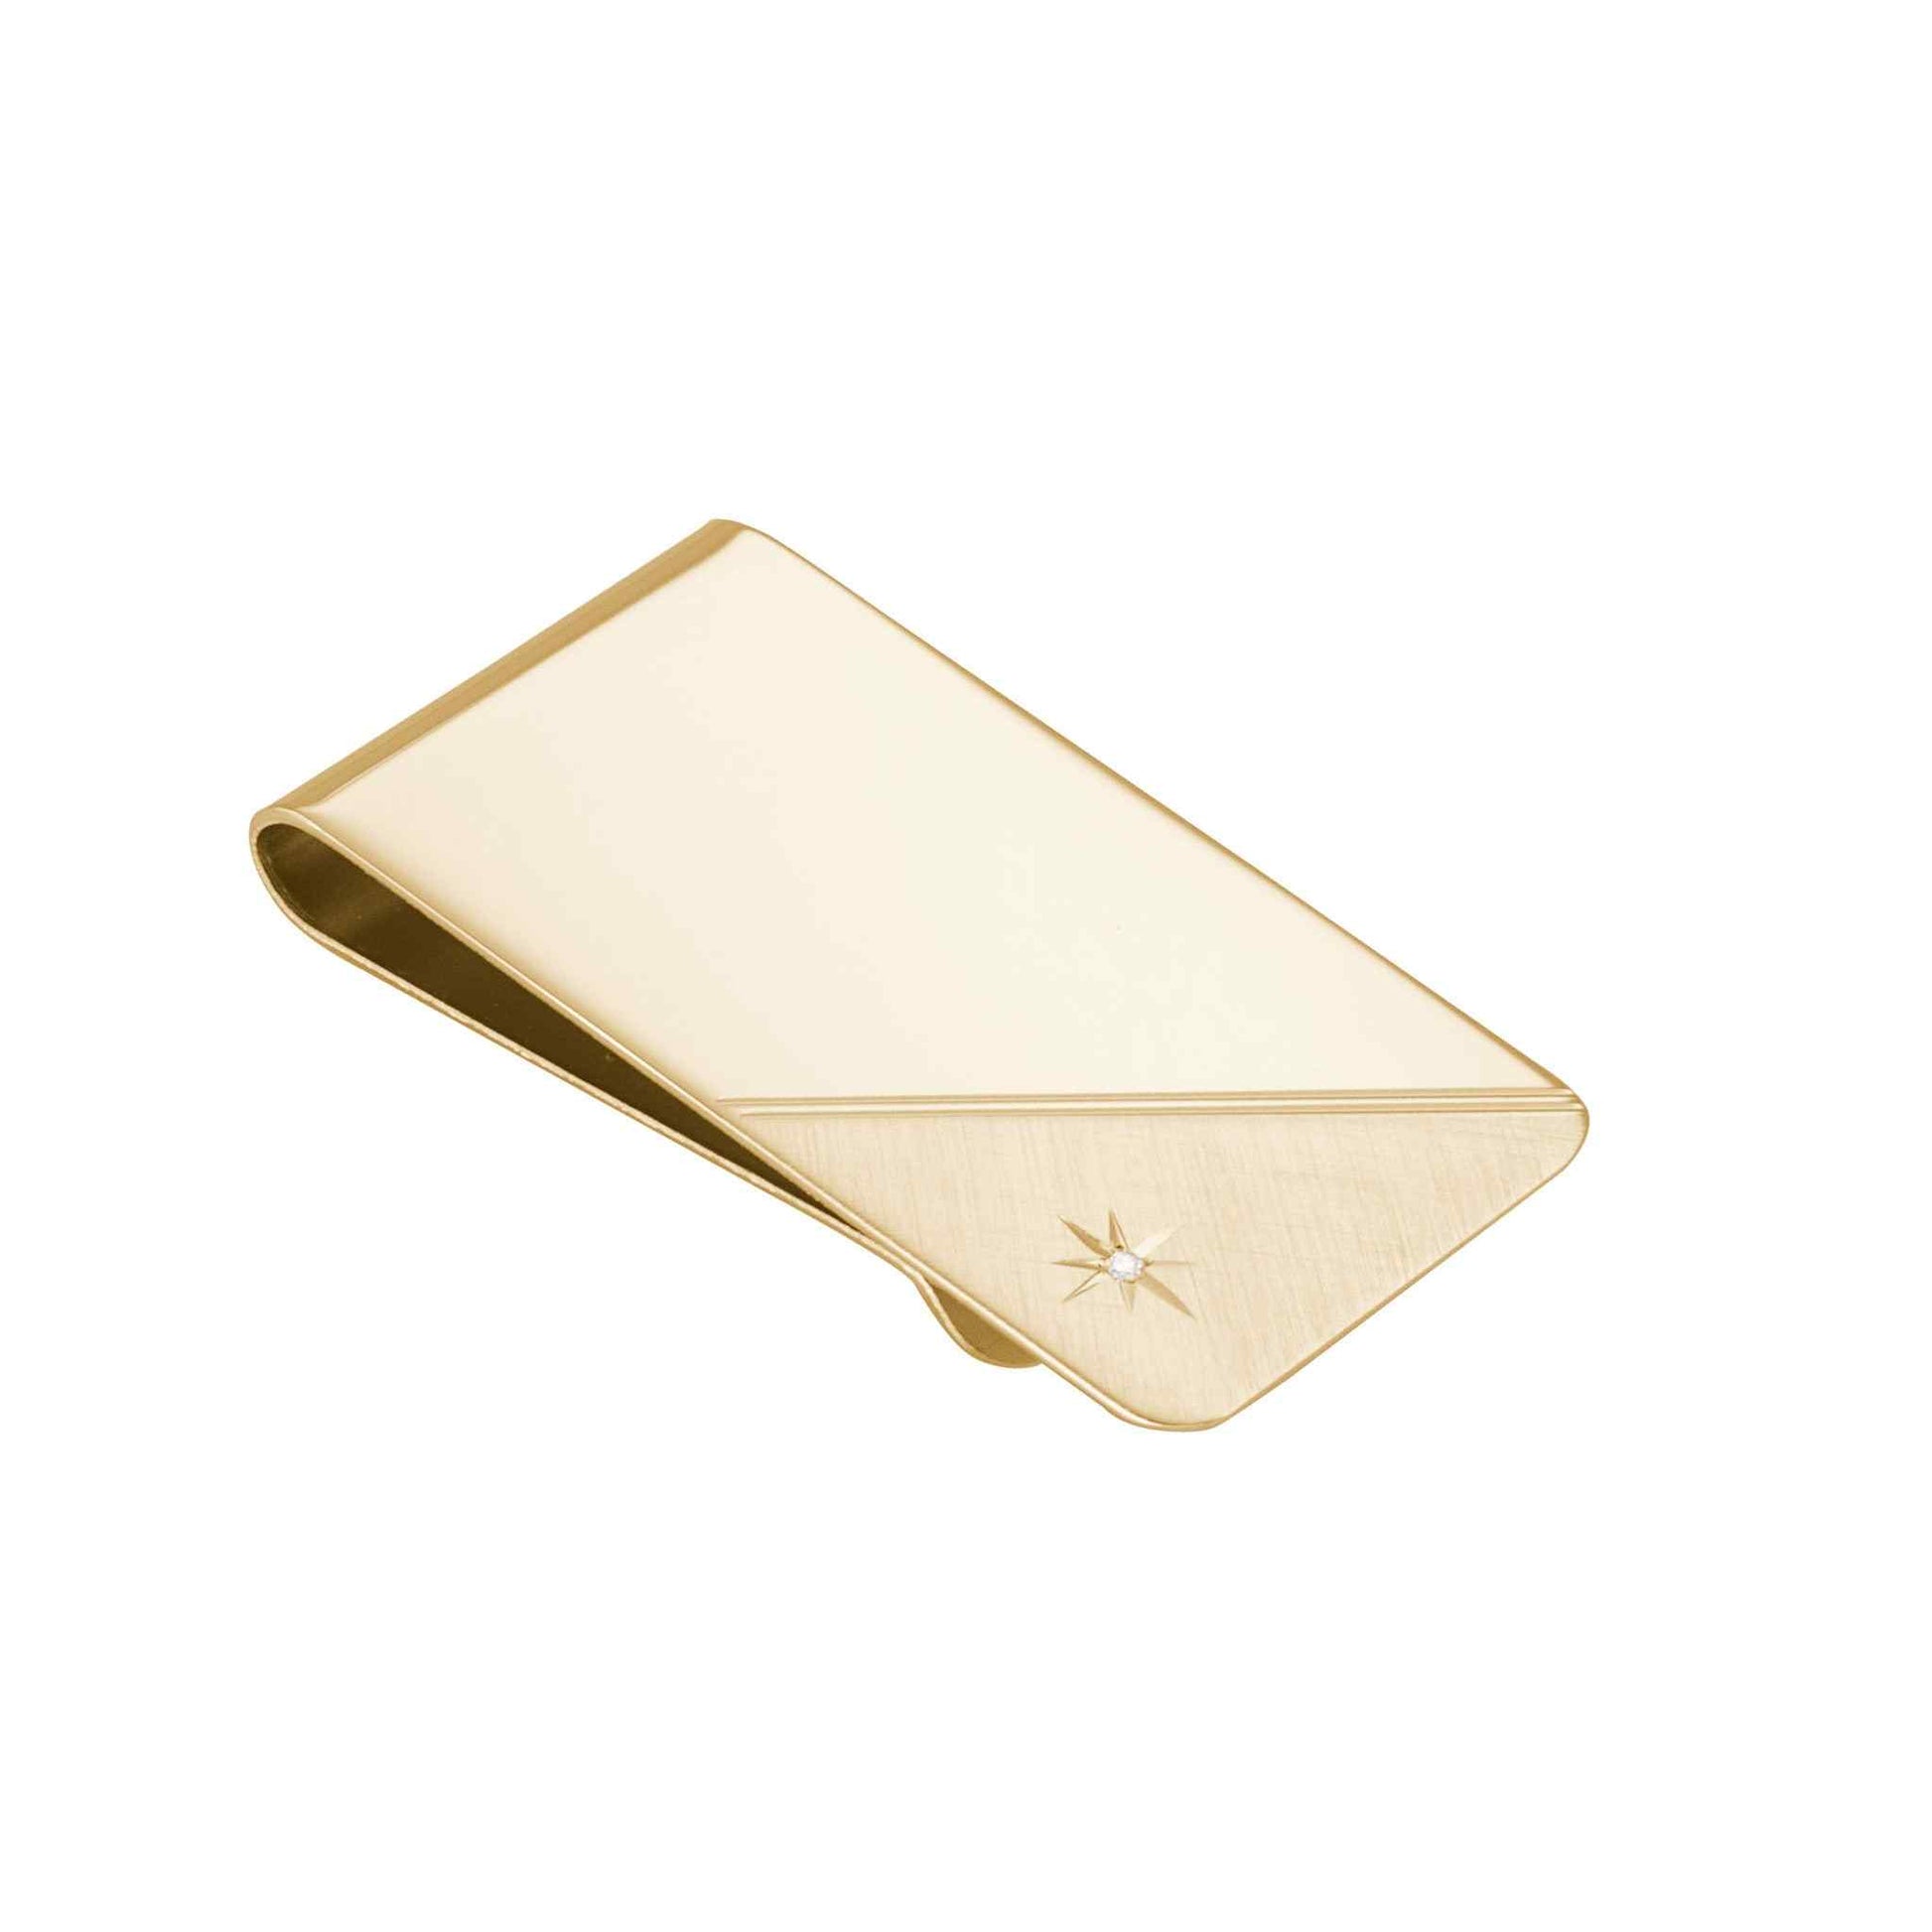 A money clip with diagonal florentine finish & diamond displayed on a neutral white background.